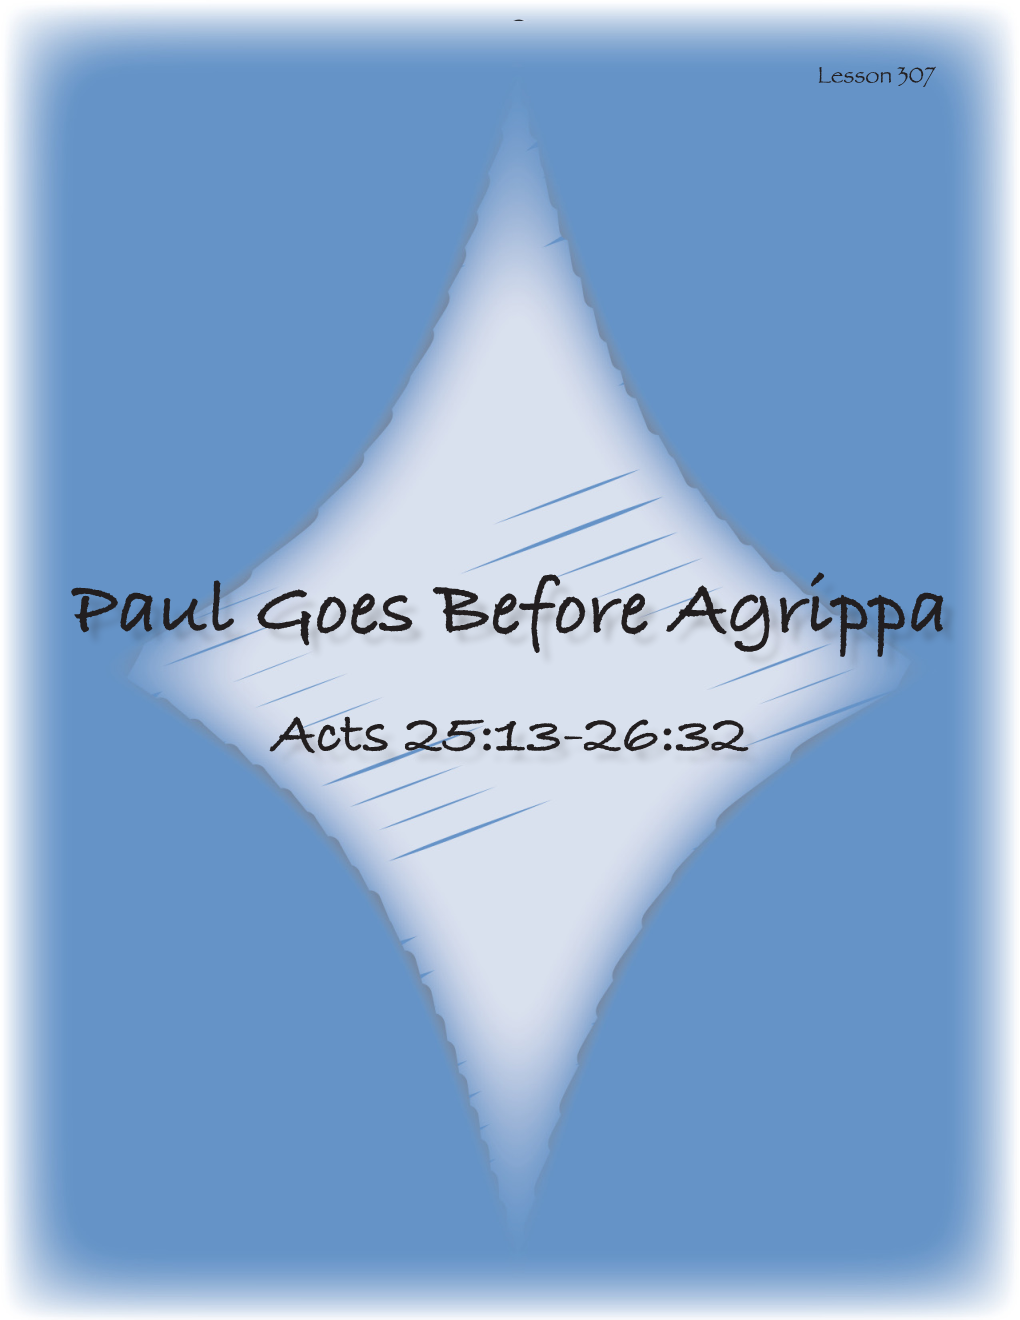 Paul Goes Before Agrippa Acts 25:13-26:32 MEMORY VERSE ACTS 26:28 Then Agrippa Said to Paul, "You Alm Ost Persuade M E to Becom E a Christian."